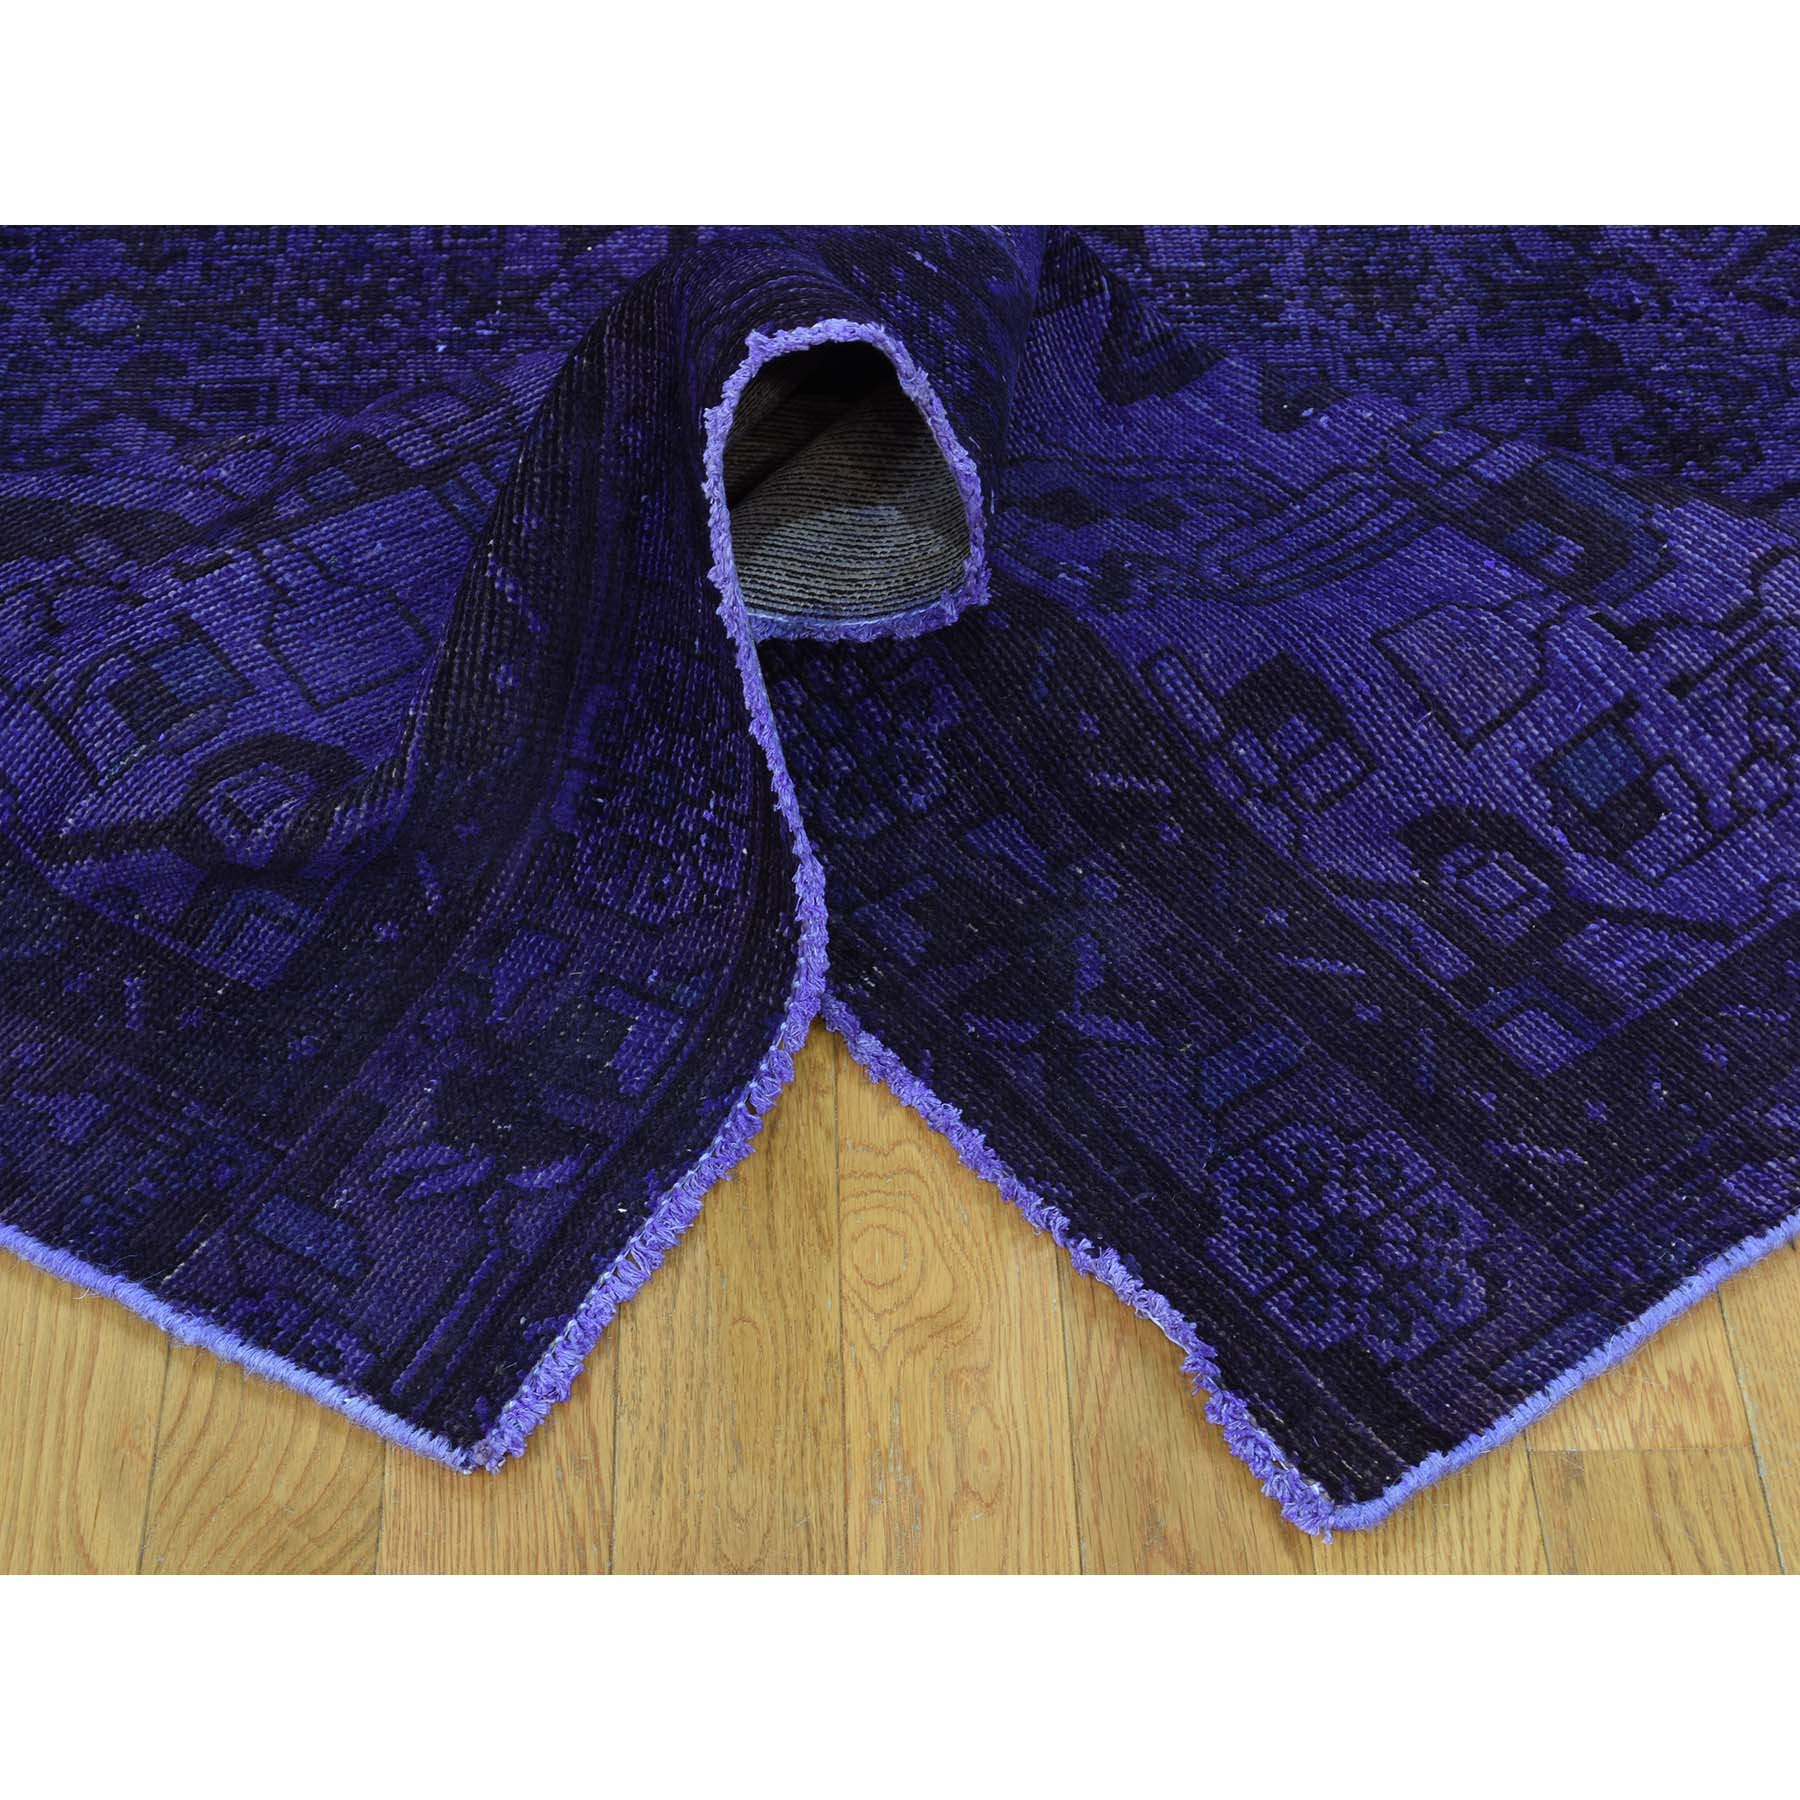 4-x10-6  Hand-Knotted Purple Overdyed Hamadan Pure Wool Wide Runner Rug 